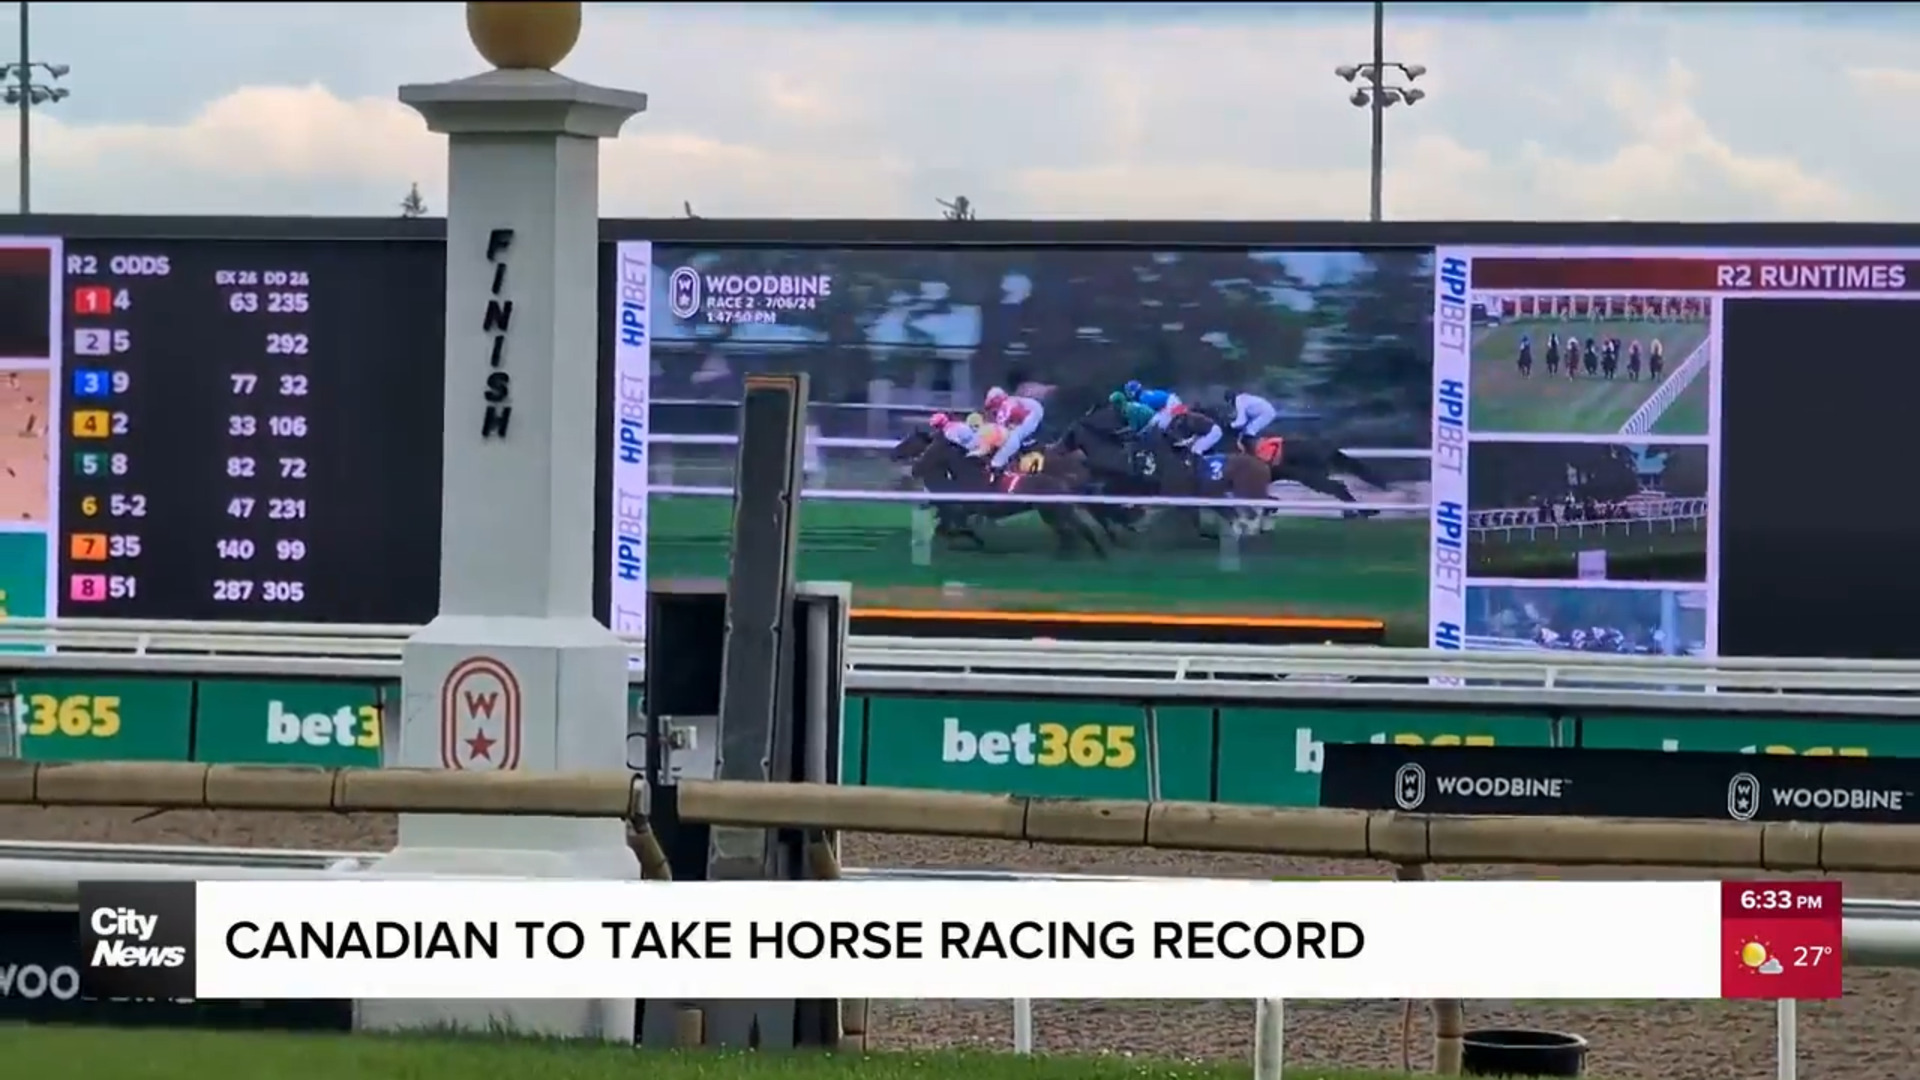 Record in horse racing coming into Canadian hands